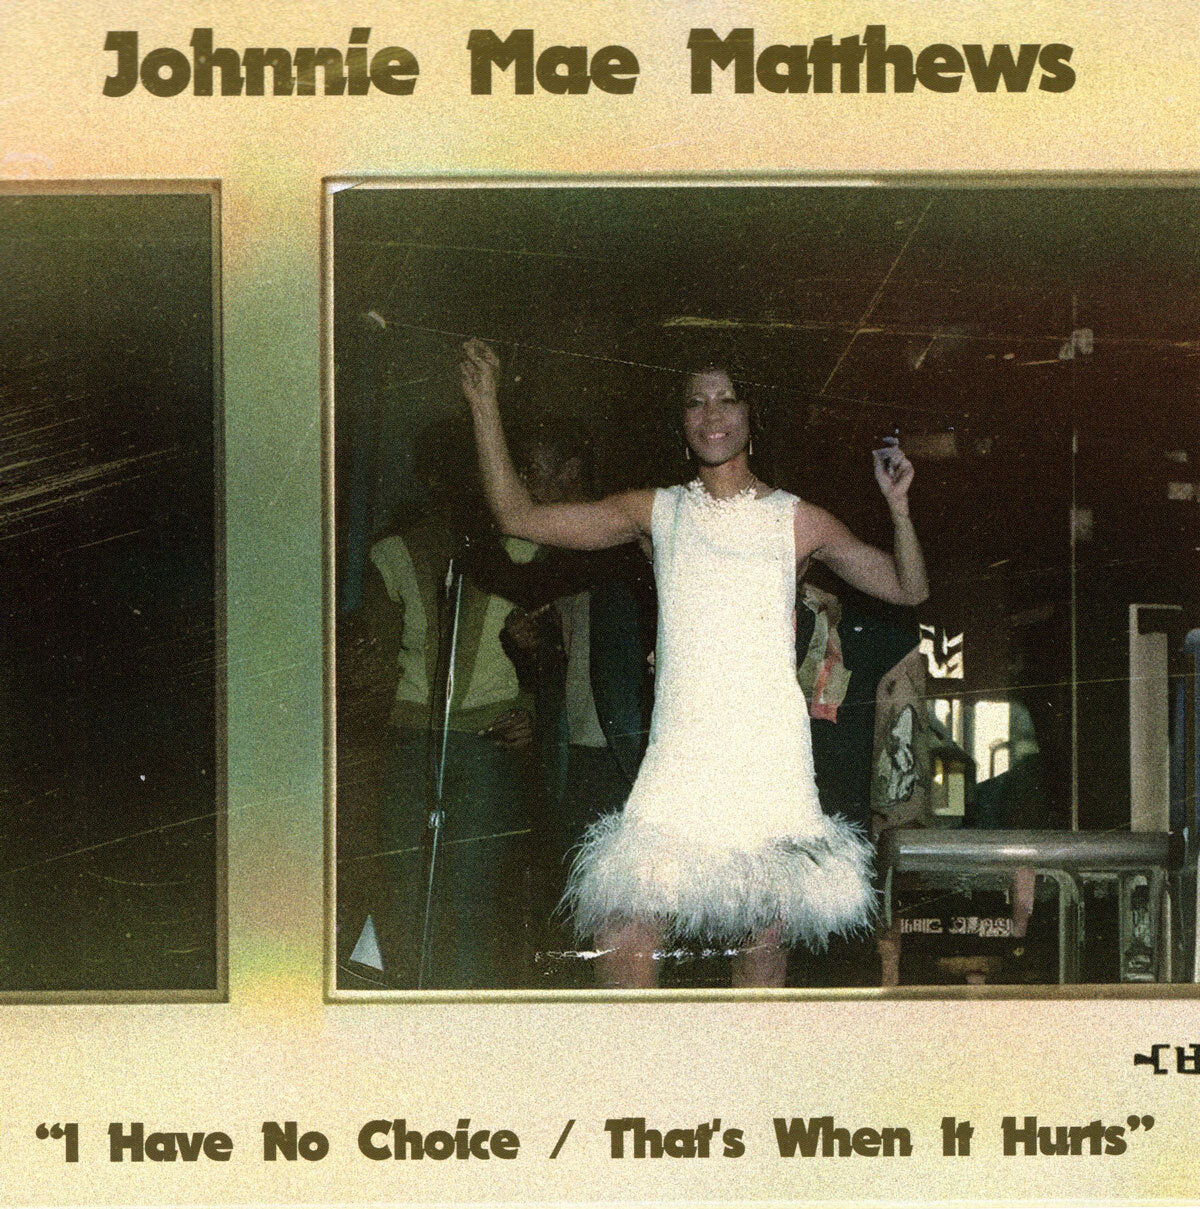 More information about "Johnnie Mae Matthews - I Have No Choice / That